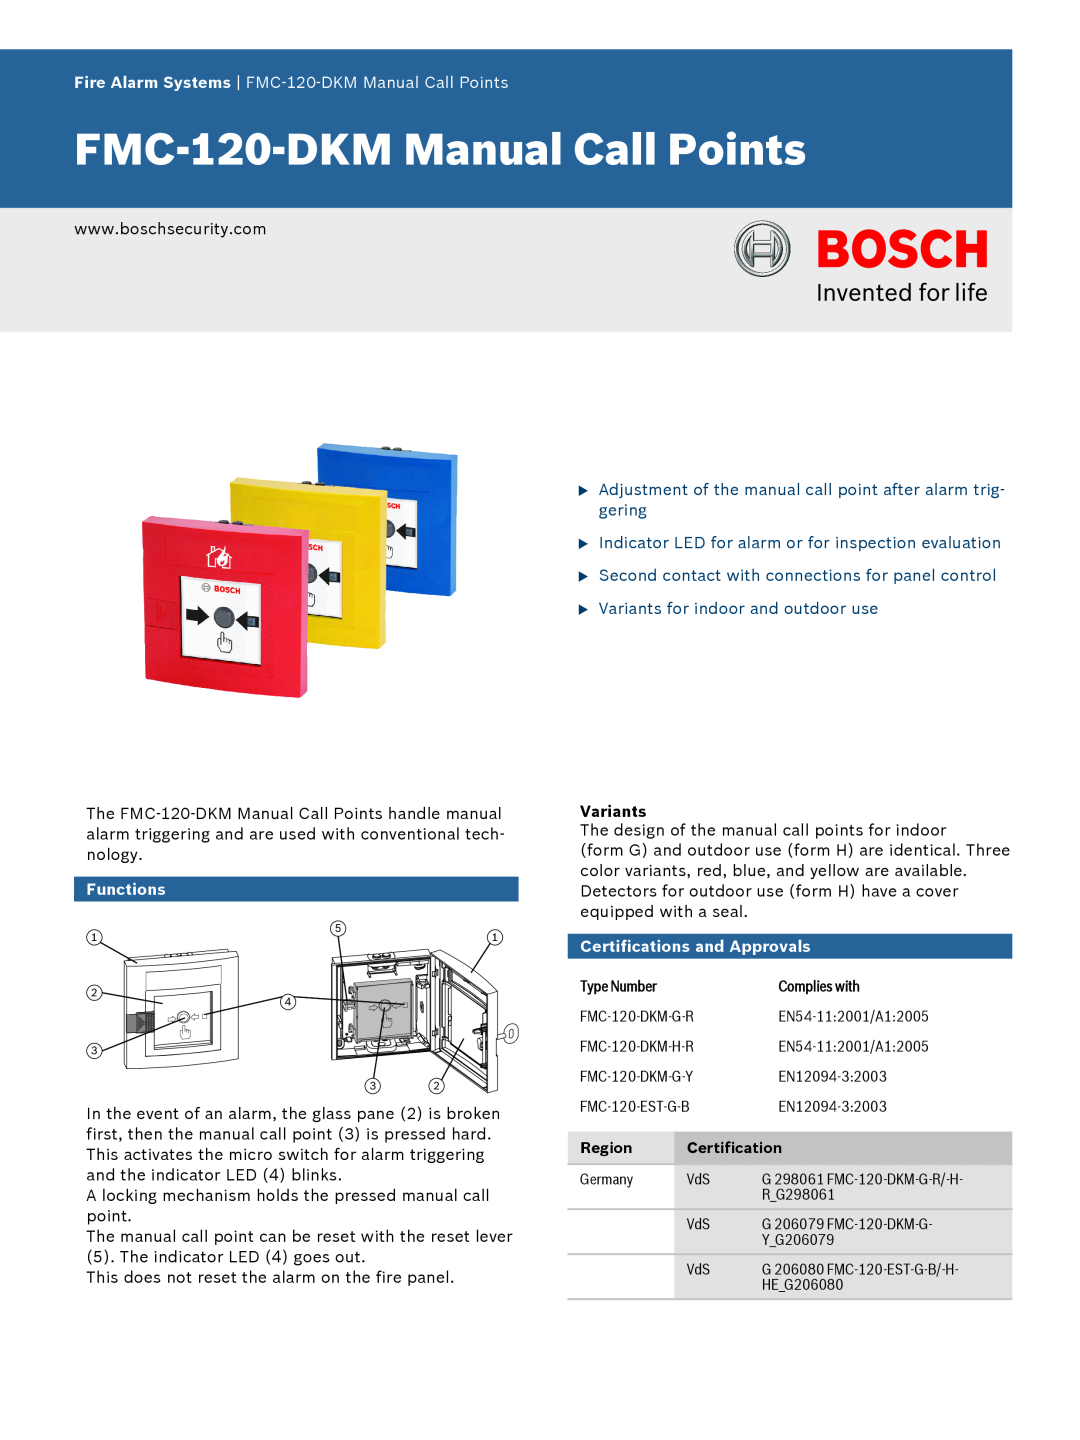 Bosch Appliances FMC-120-DKM manual Fire Alarm Systems FMC‑120‑DKM Manual Call Points, Functions, Variants 